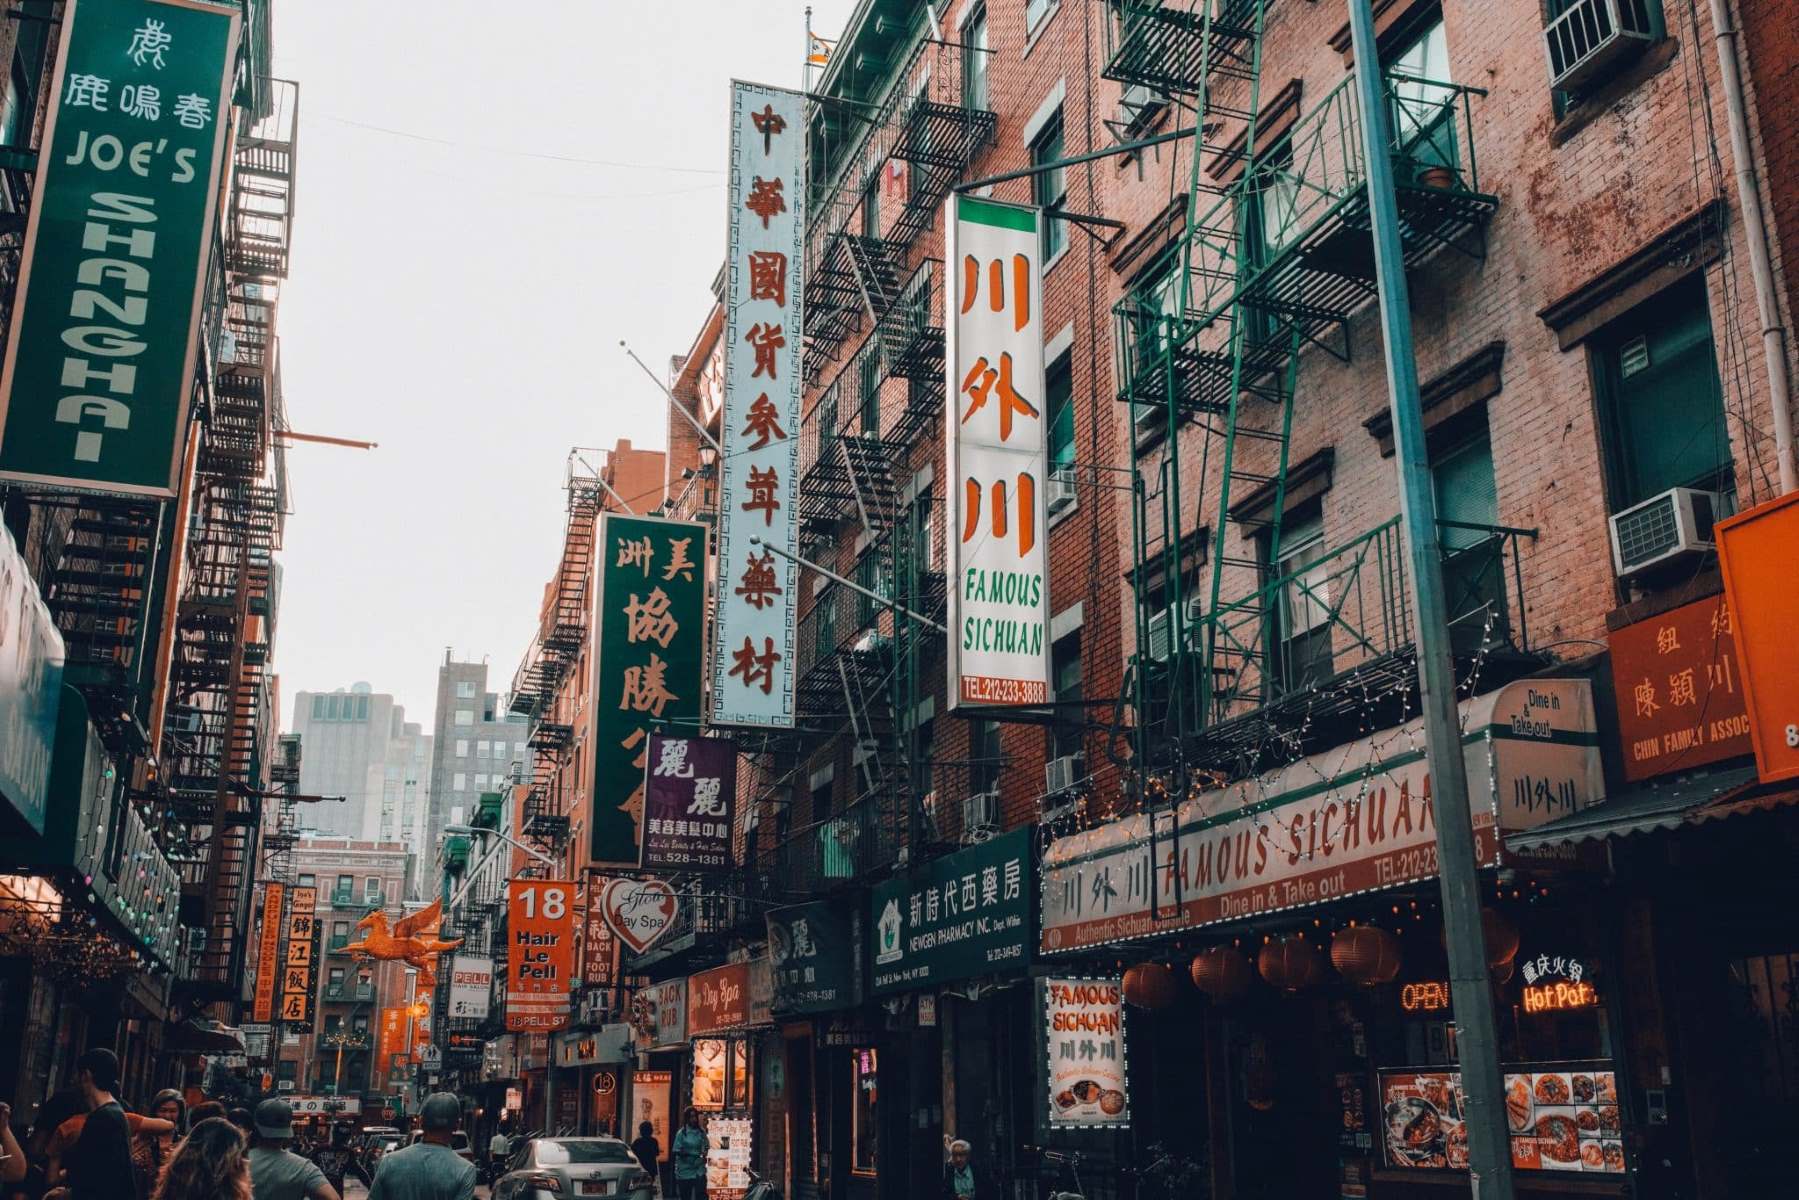 The Ultimate Guide To The Best Authentic Chinese Cuisine In NYC Chinatown!